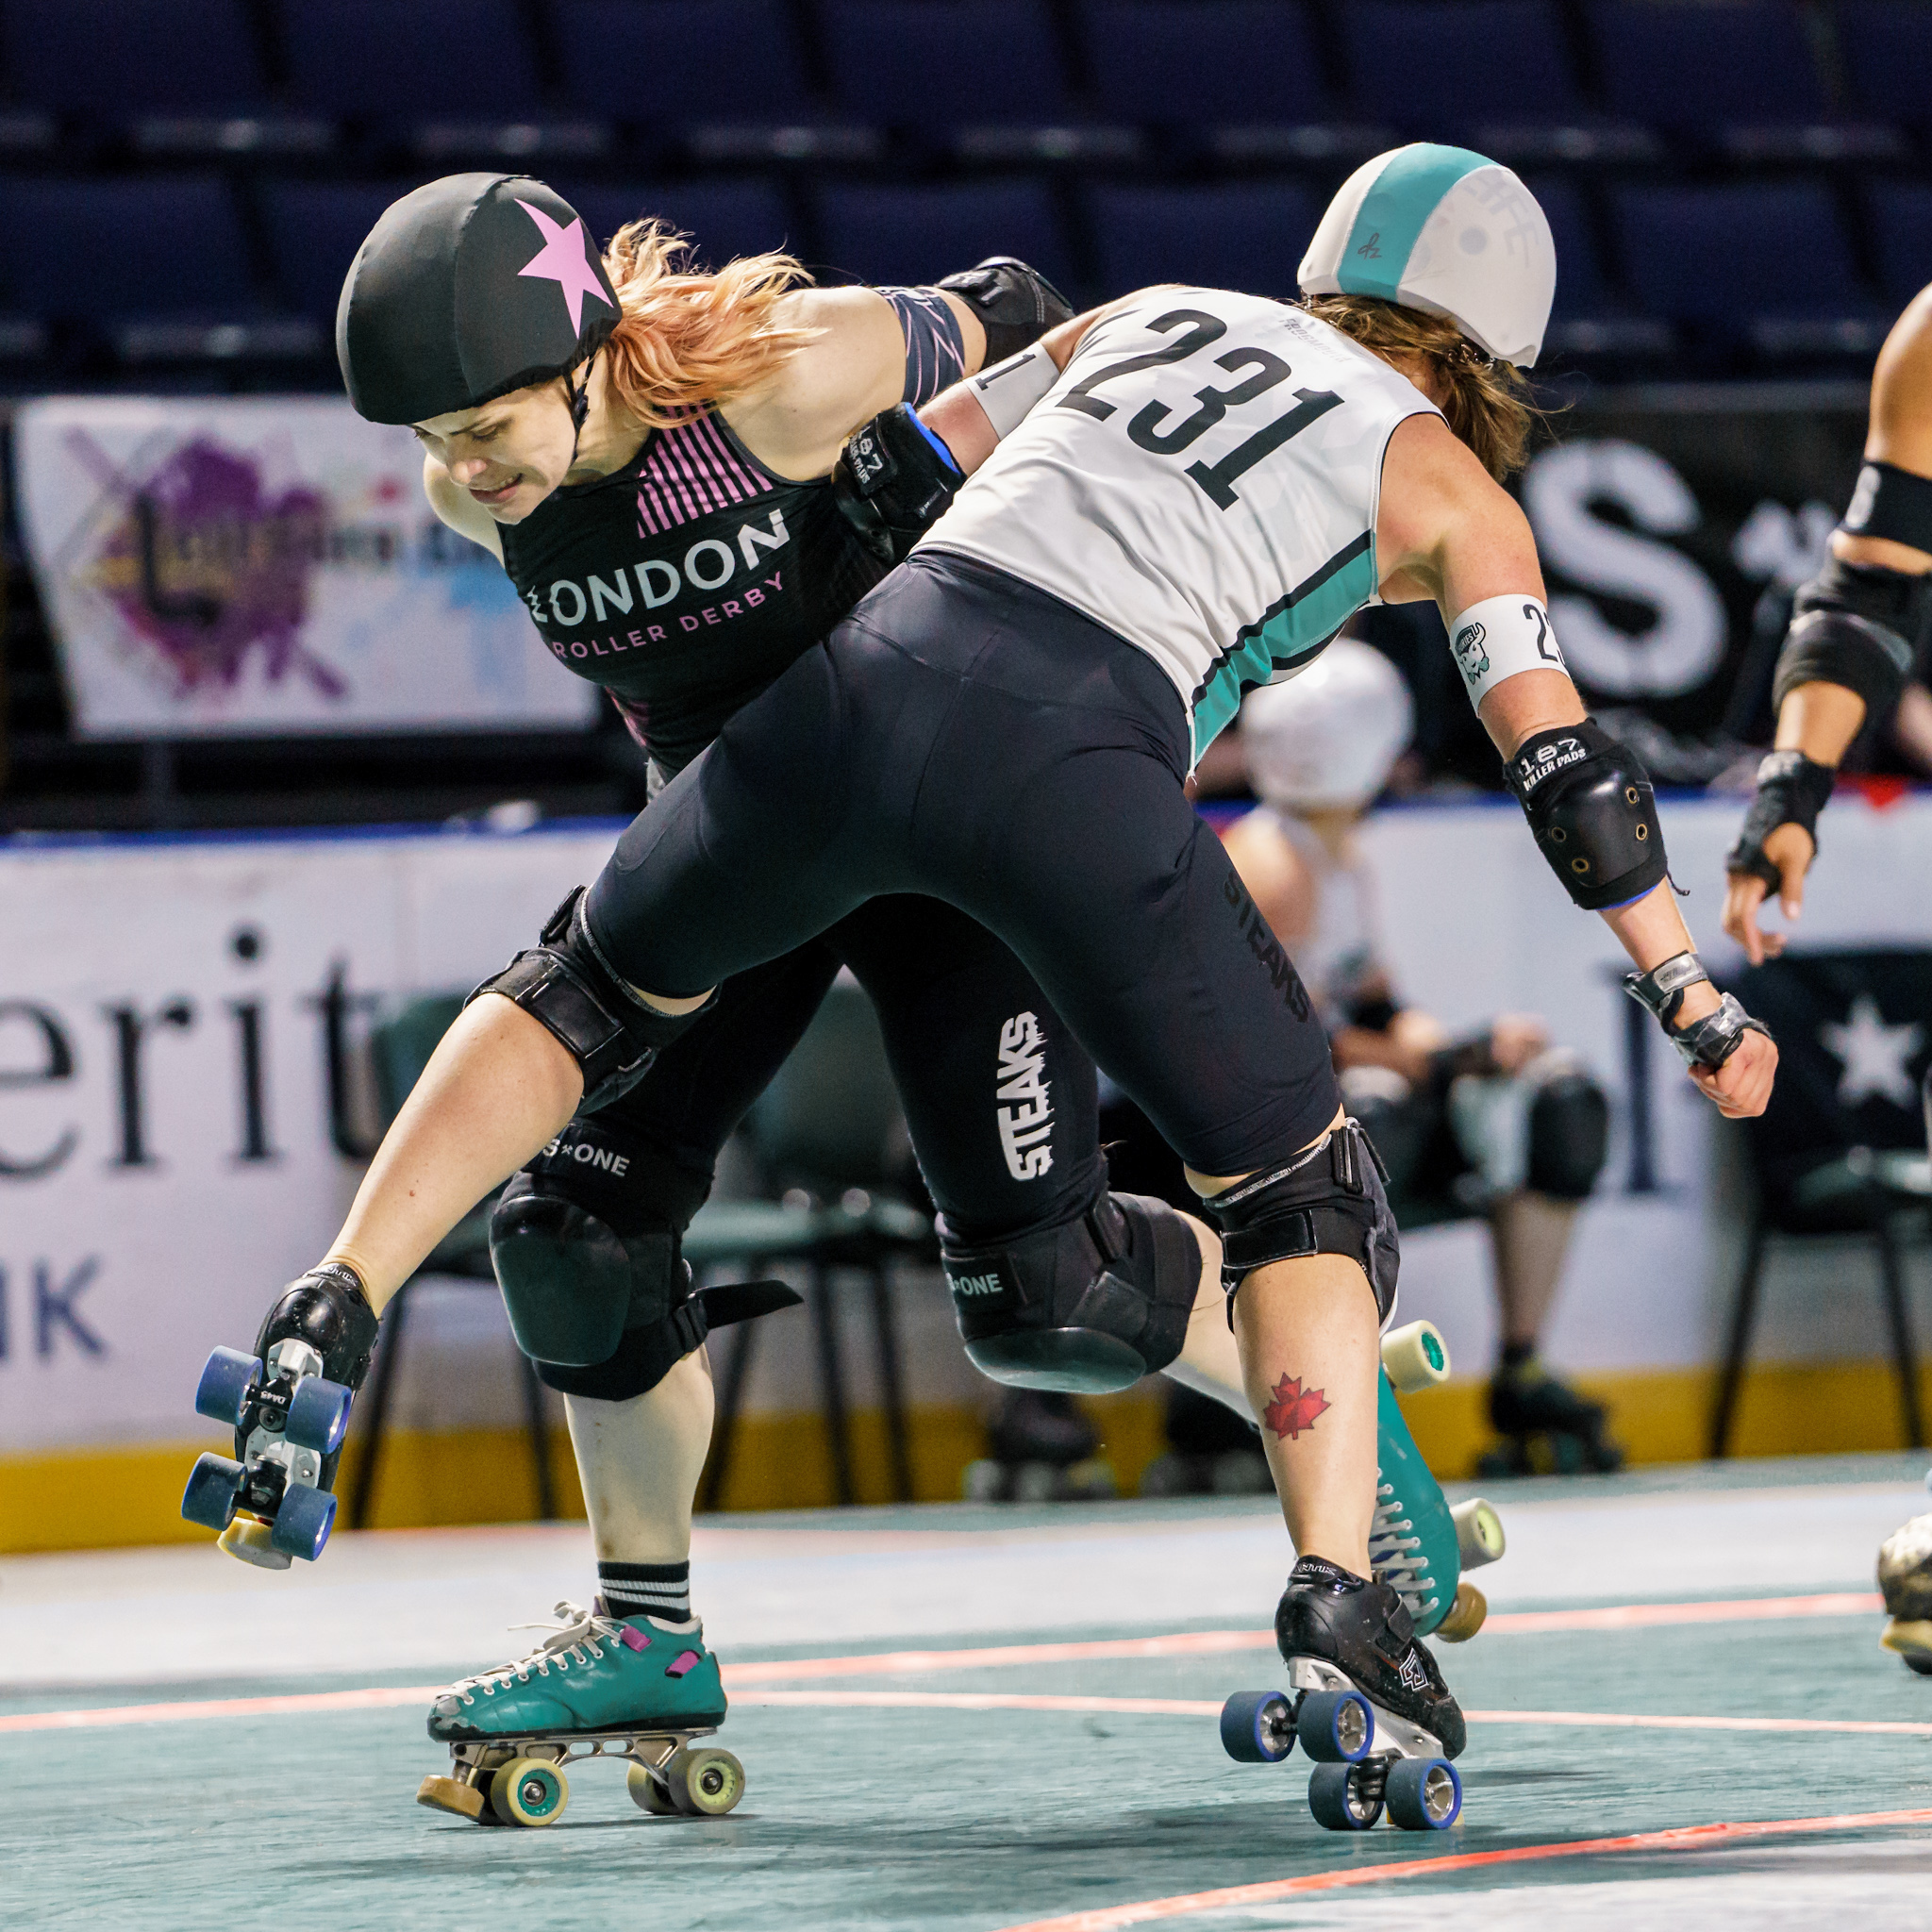 London vs Queen City in Game 3 of the 2019 International WFTDA Playoffs in Seattle